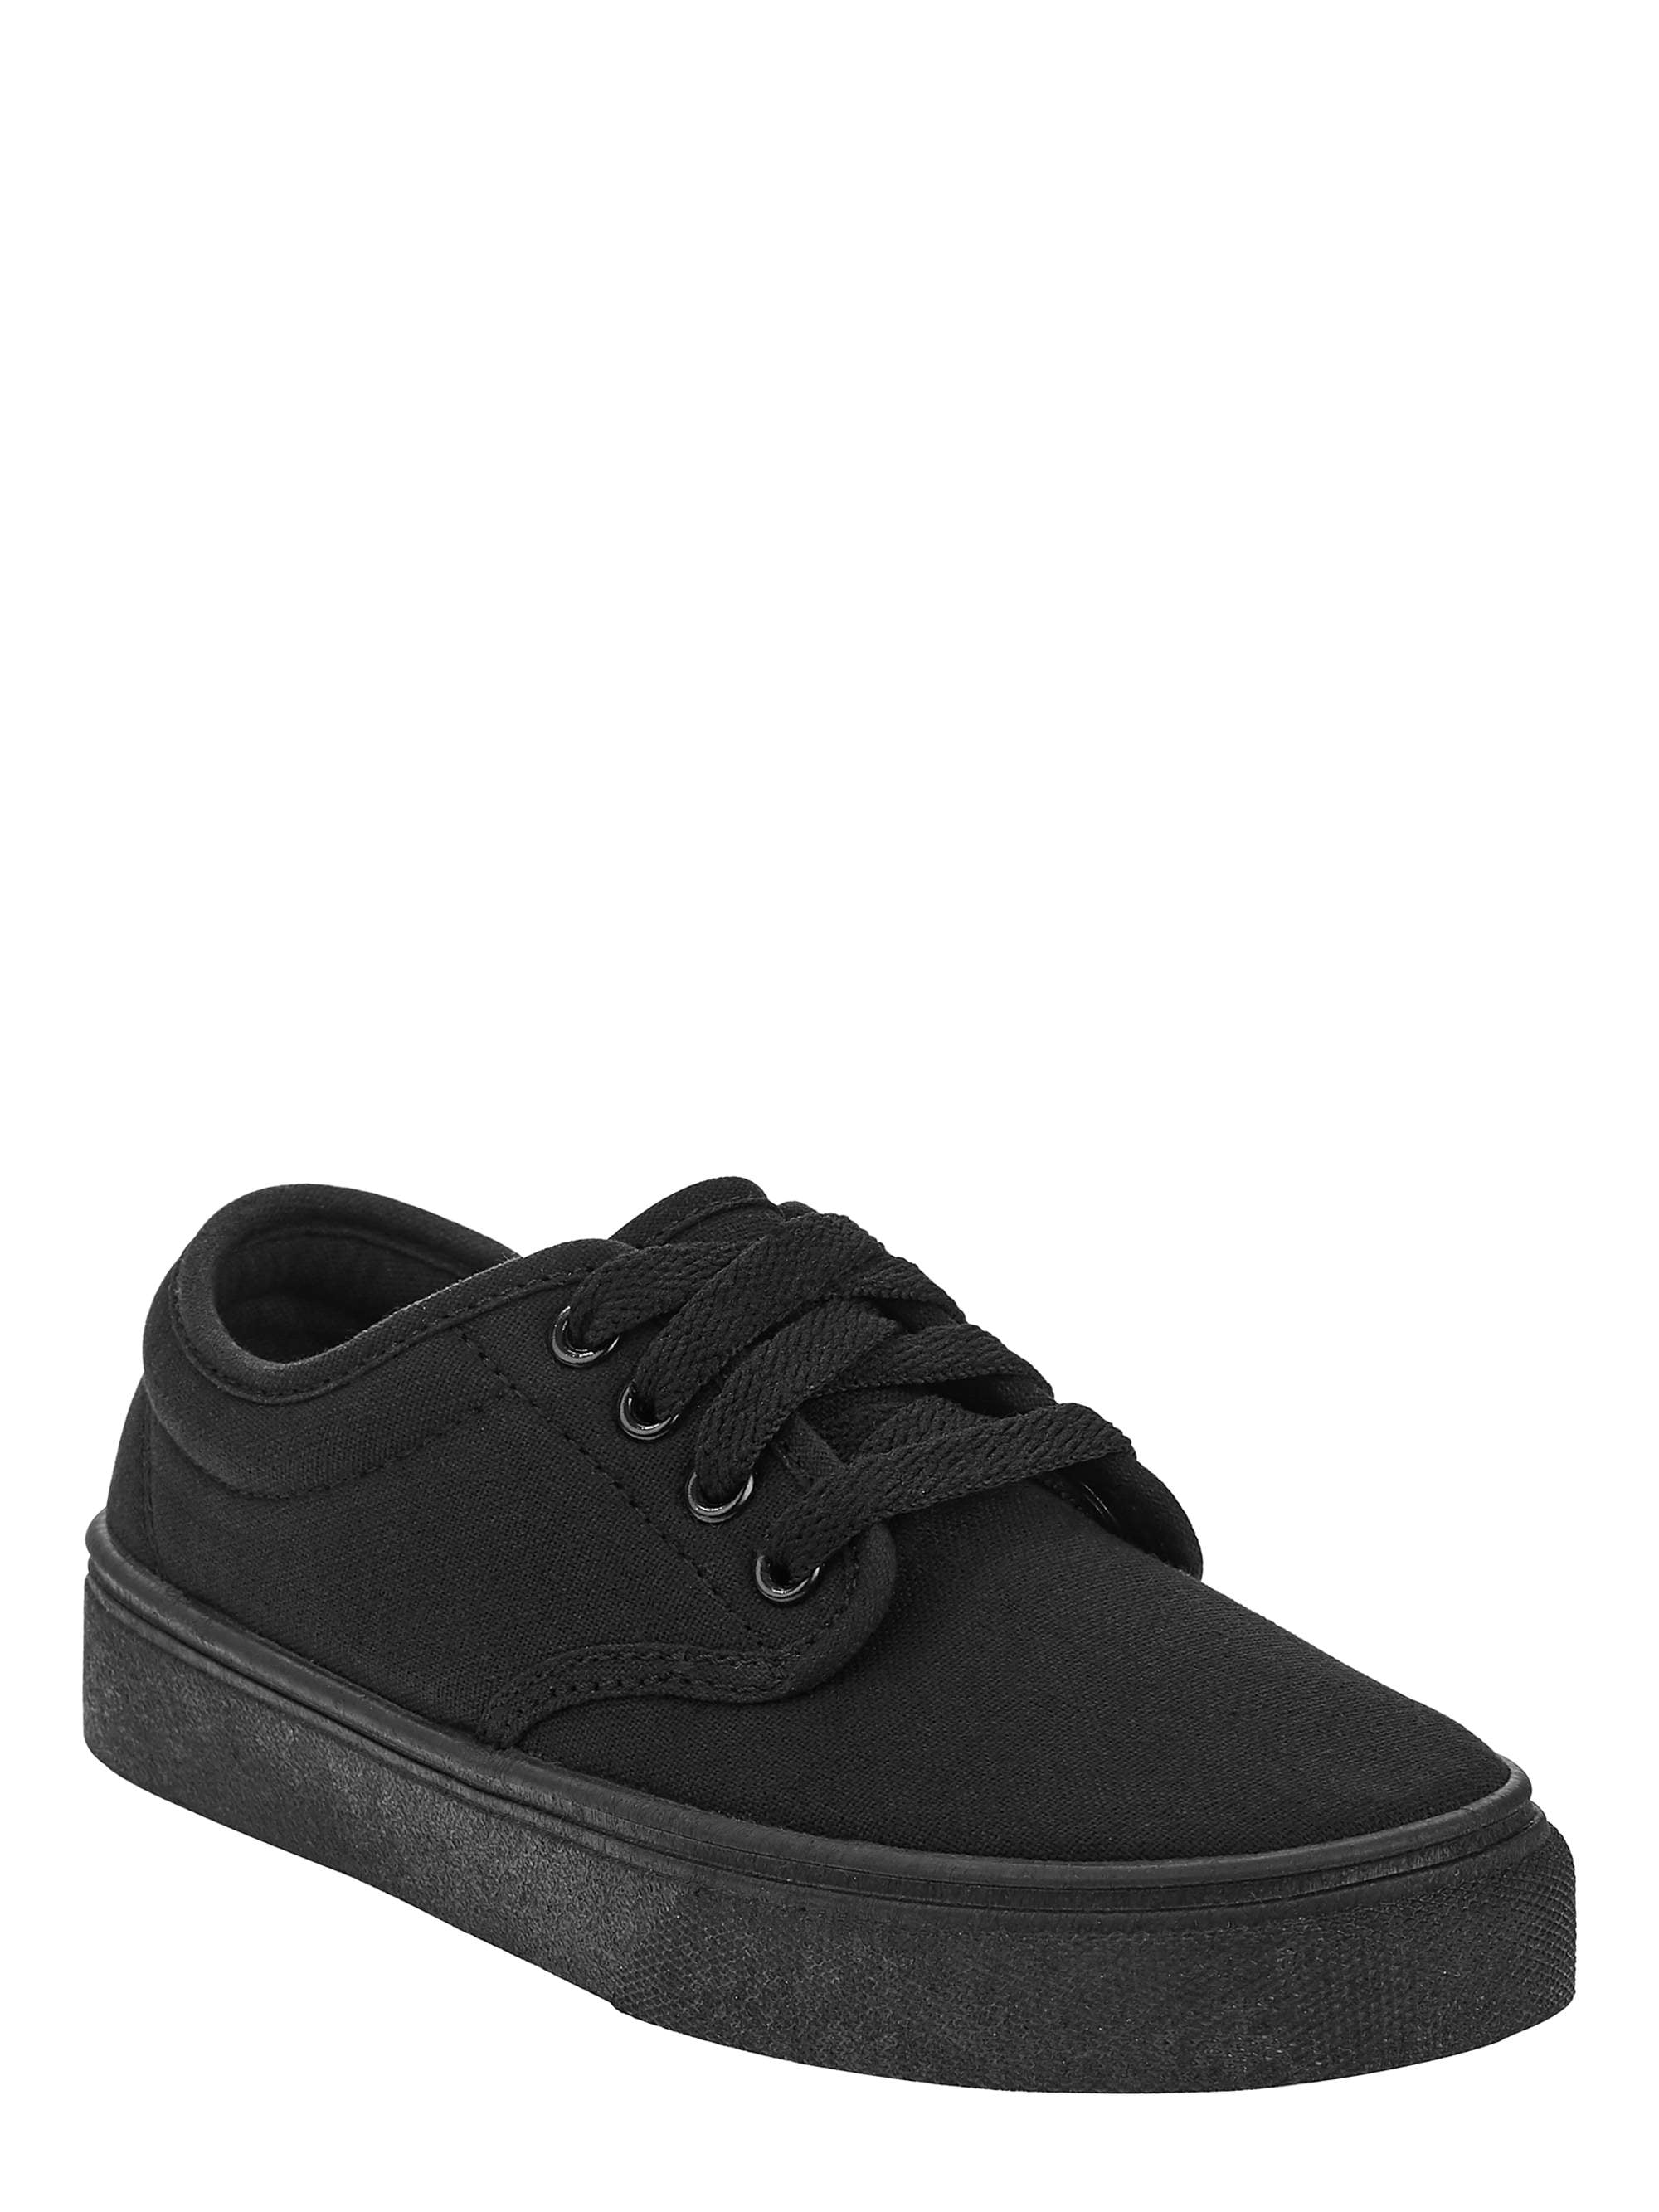 Wonder Nation Wonder Nation Byb Casual Wn Laceup Shoes